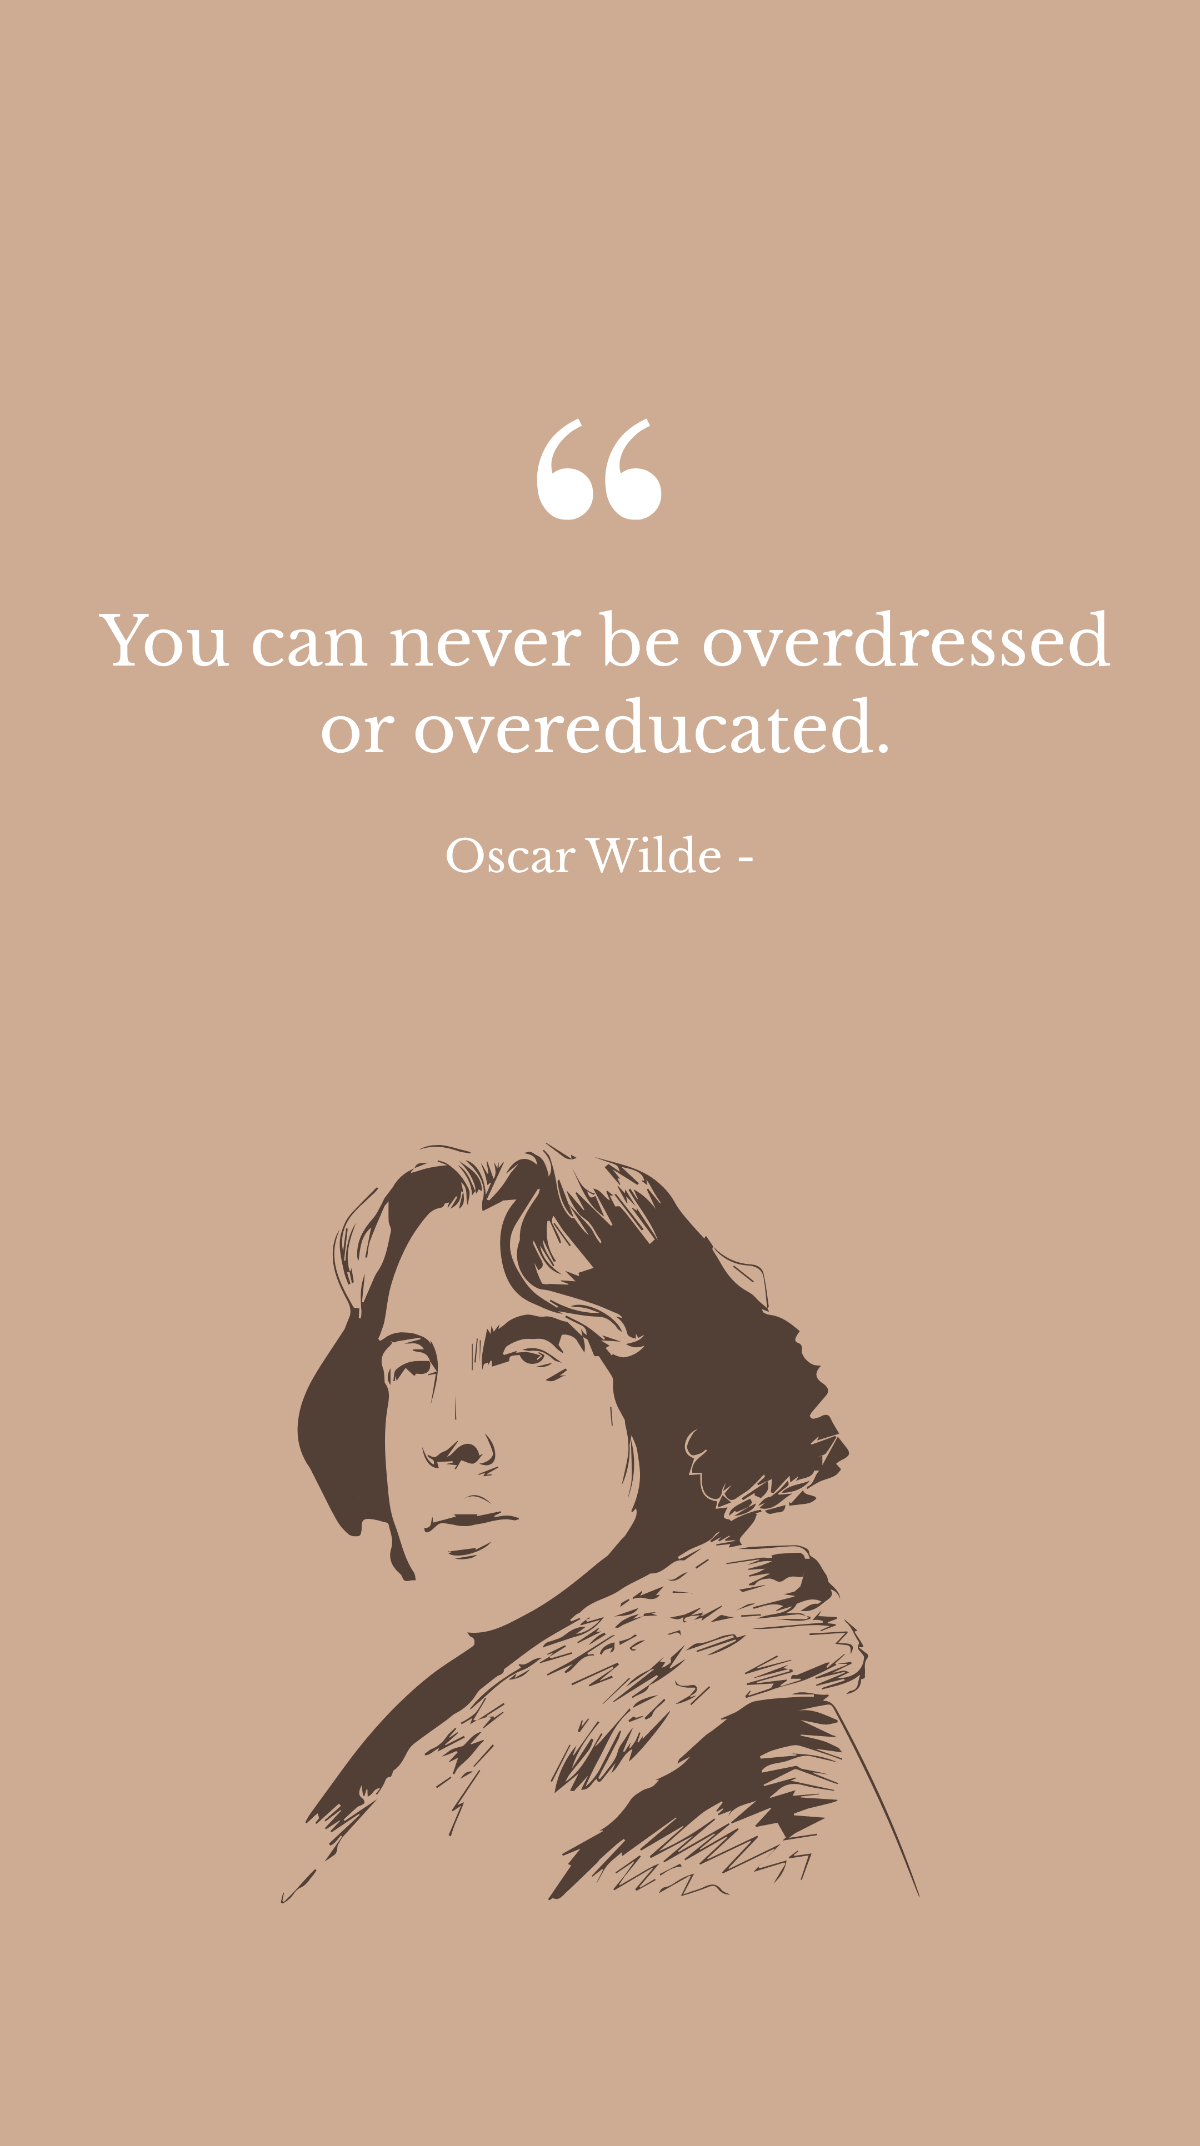 Oscar Wilde - You can never be overdressed or overeducated. Template